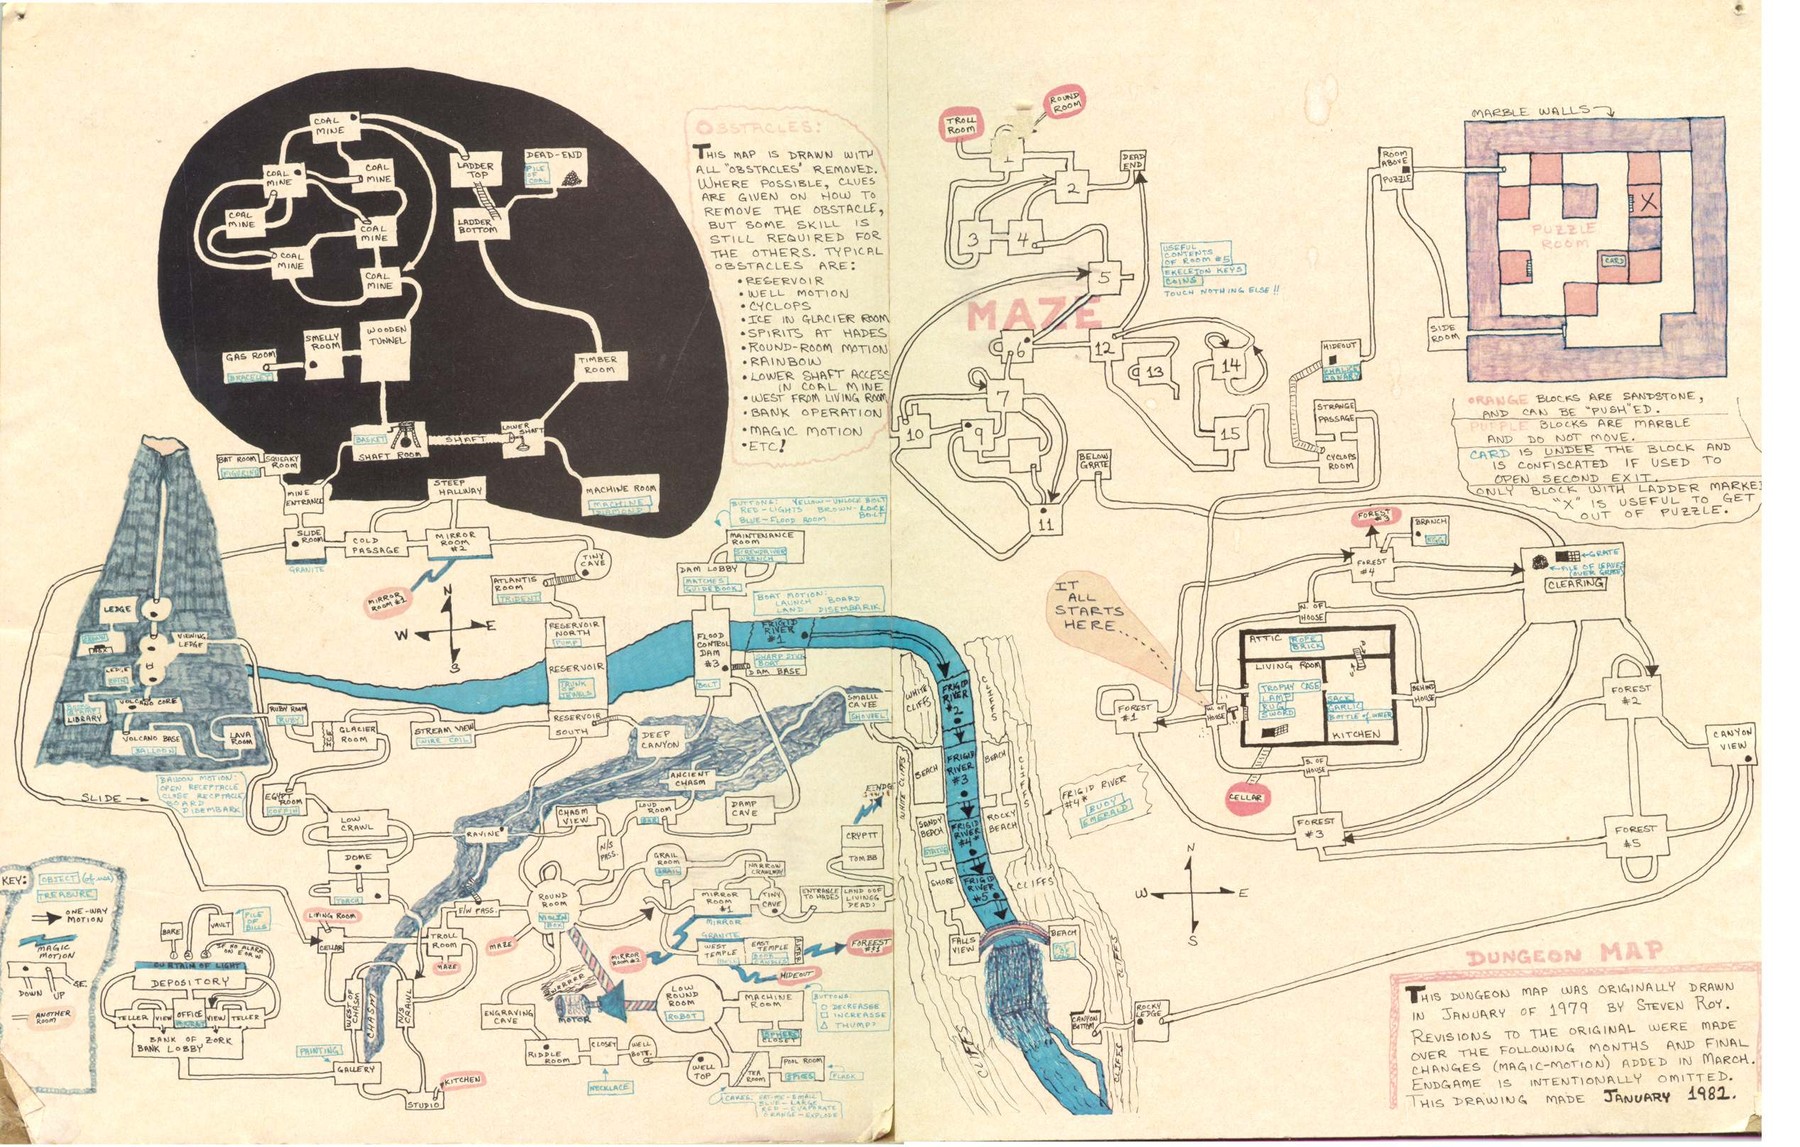 “A map of the original ZORK I. Drawn around 1981 by Steven Roy, this detailed image provides a guide to the user.” (via notgames)